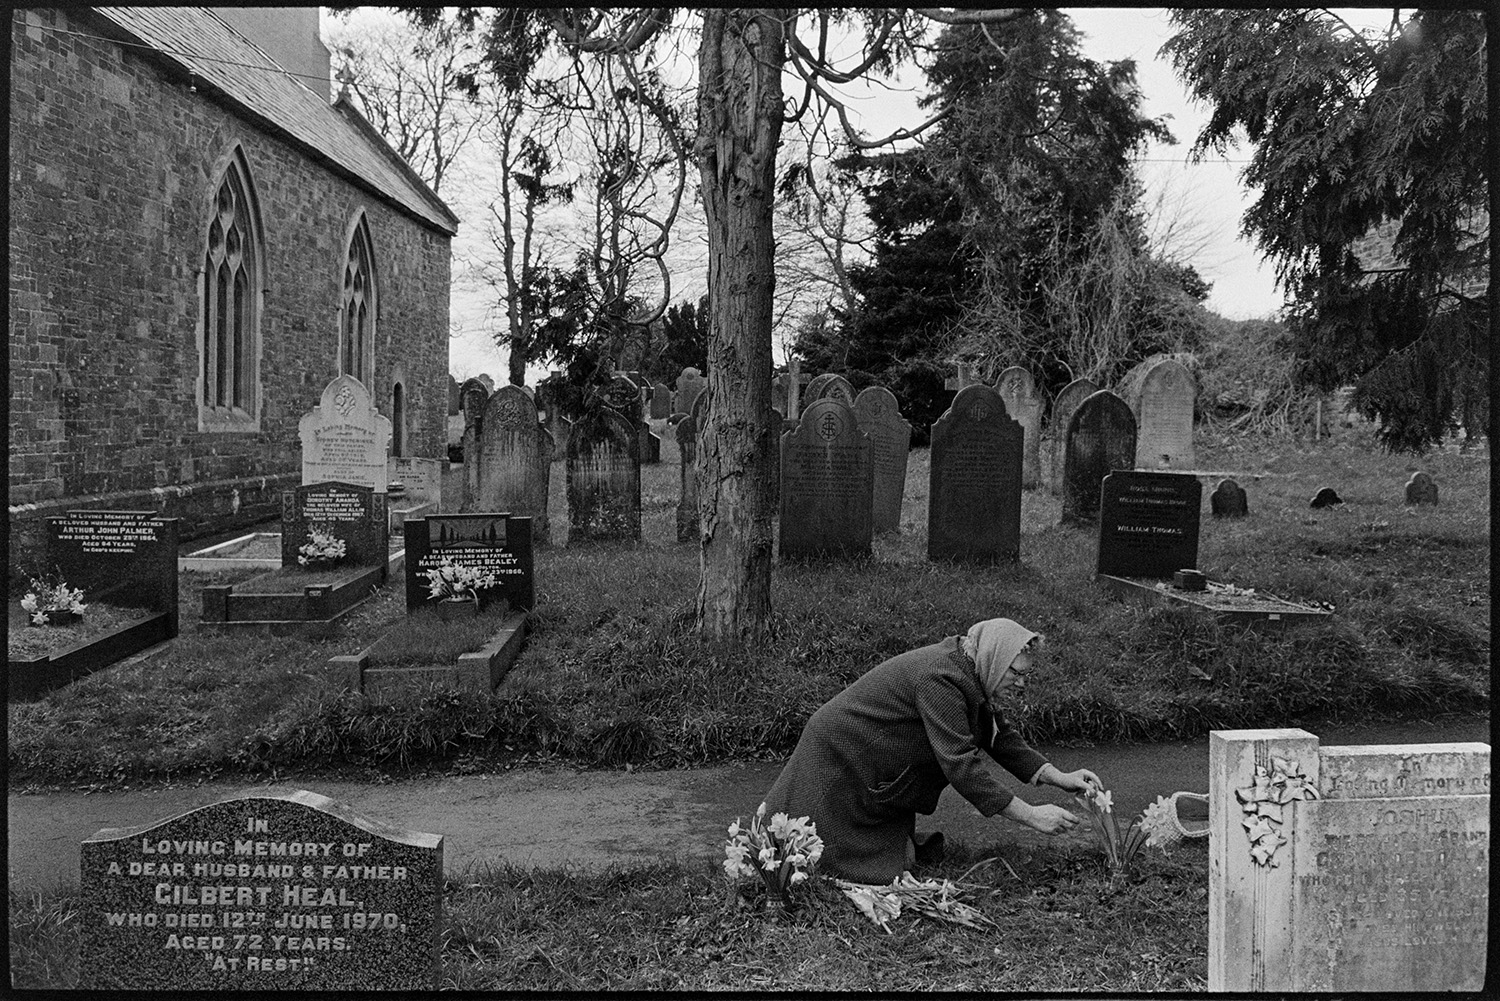 Woman putting flowers on grave for Easter.
[A woman placing daffodils on a grave in the churchyard at Dolton. Gravestones and the exterior of the church can be seen in the background.]